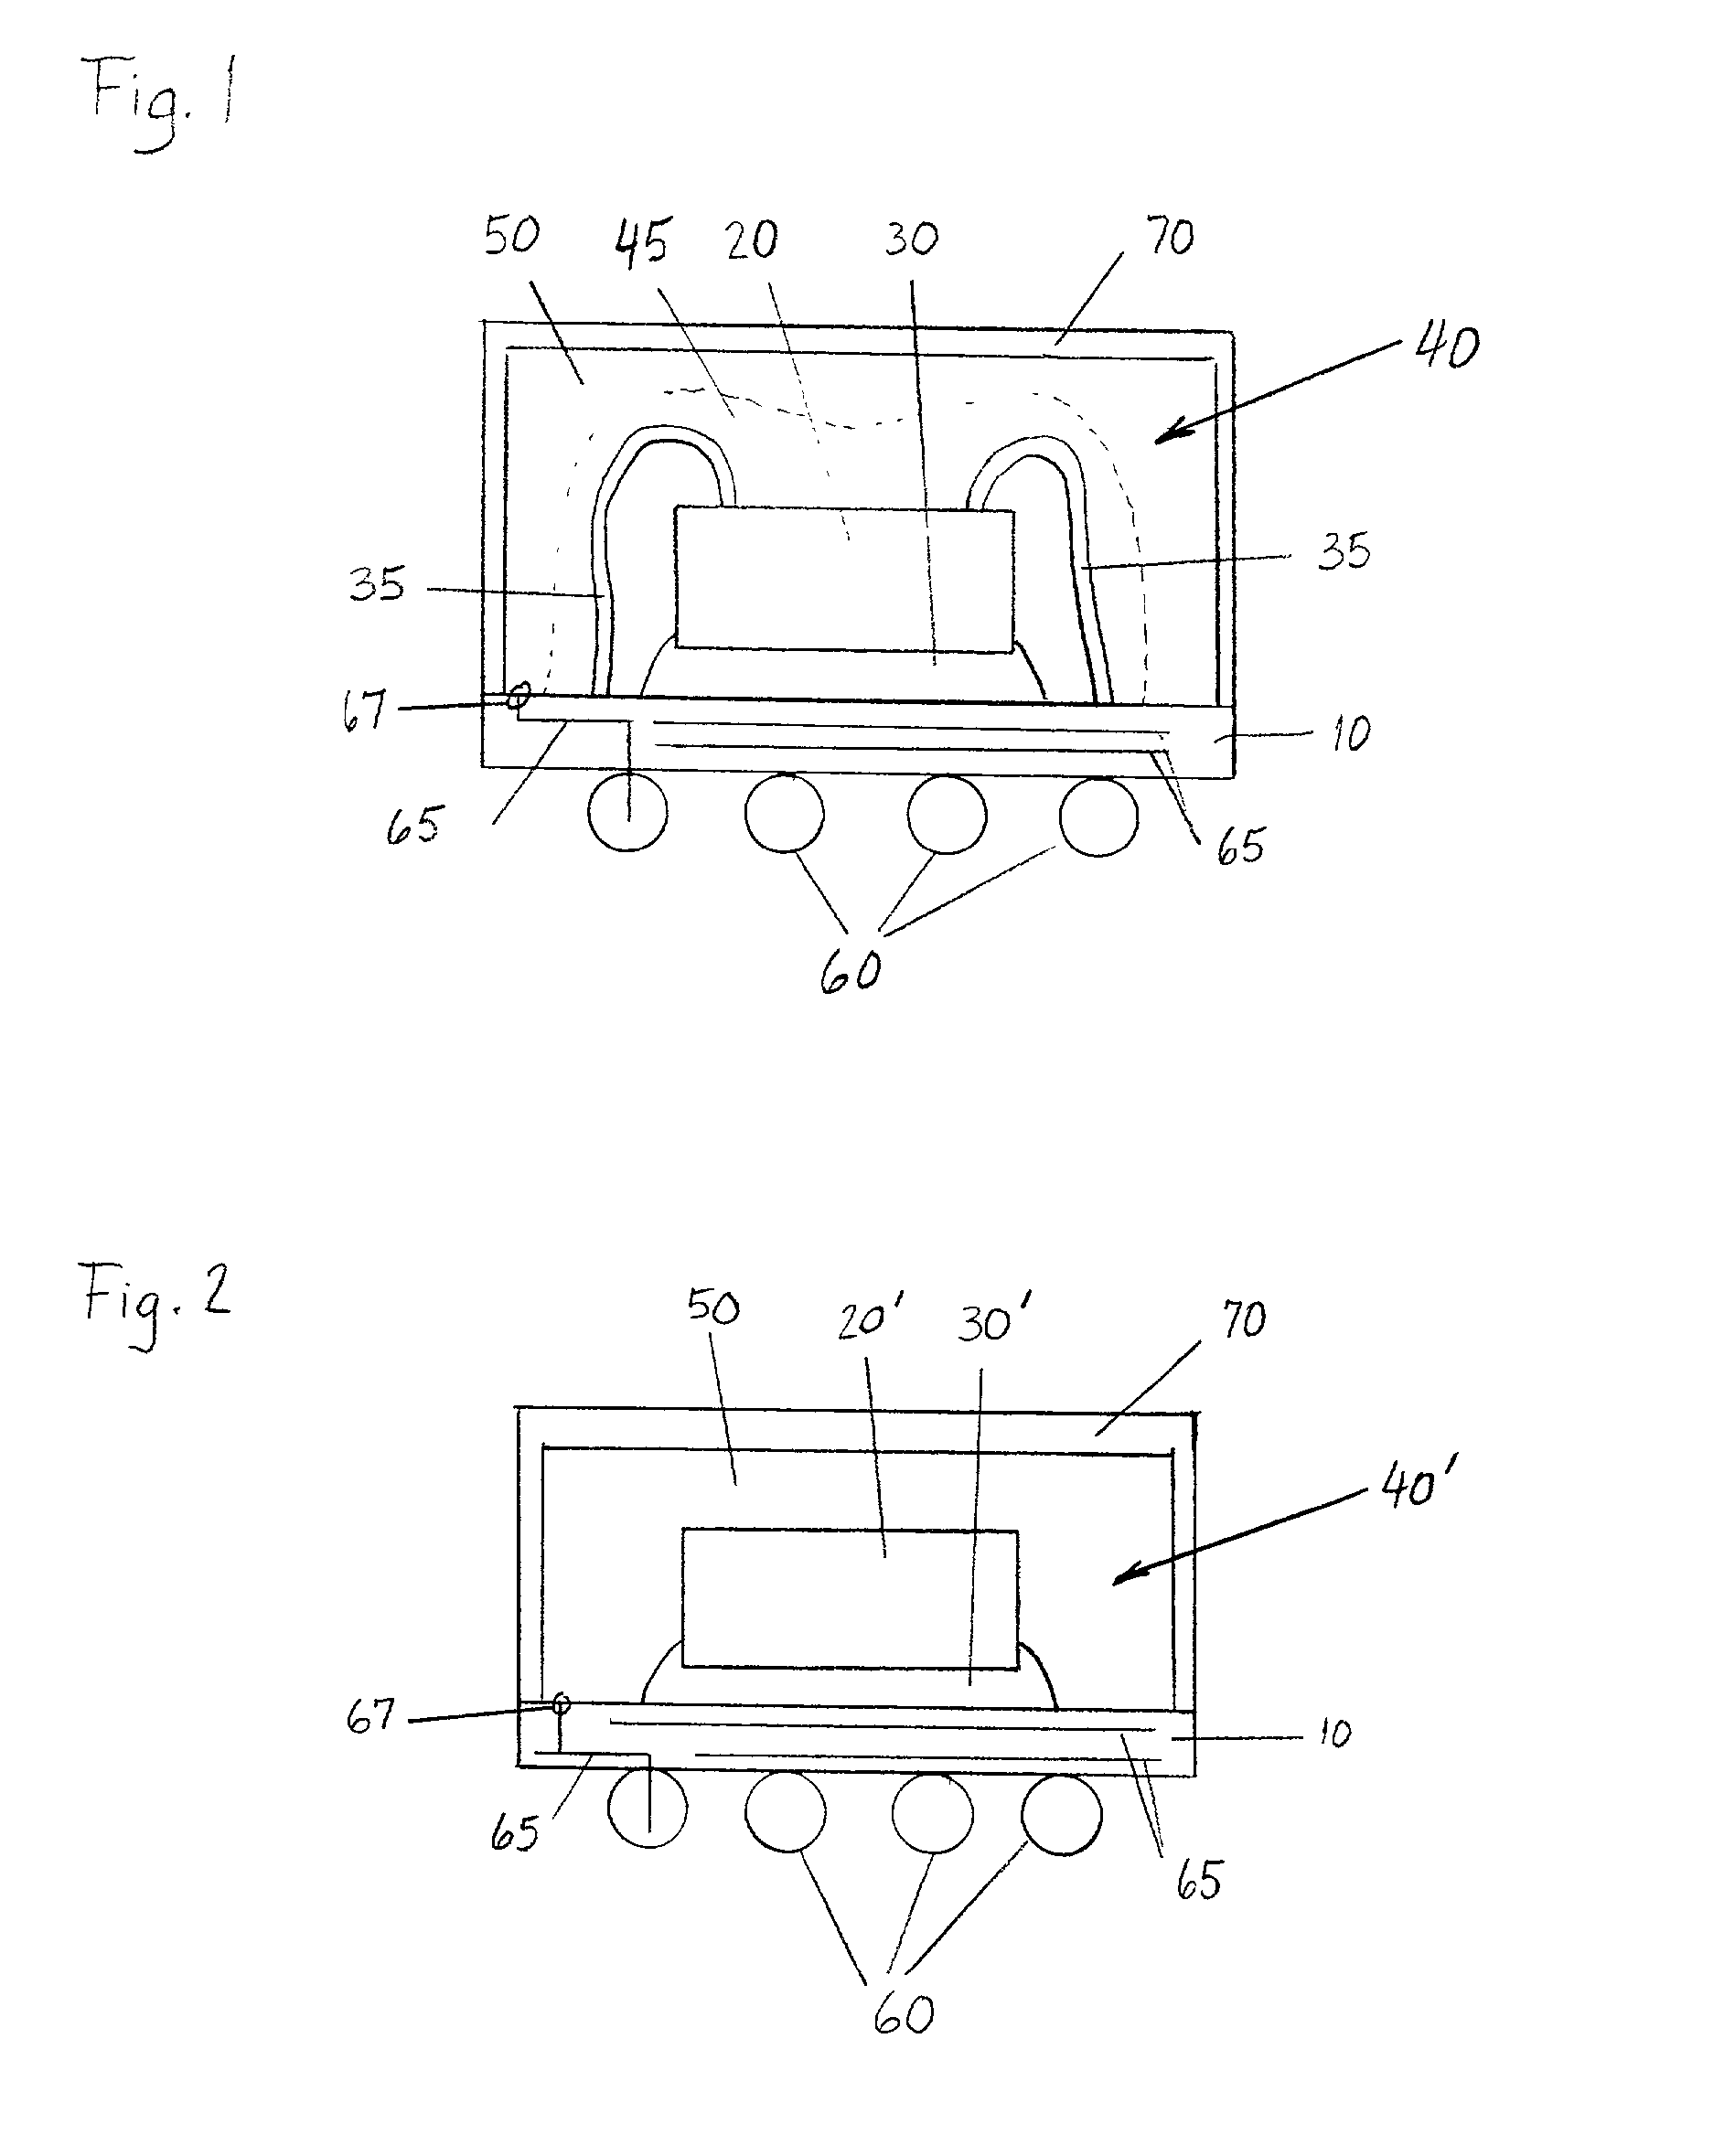 Integrated EMC shield for integrated circuits and multiple chip modules